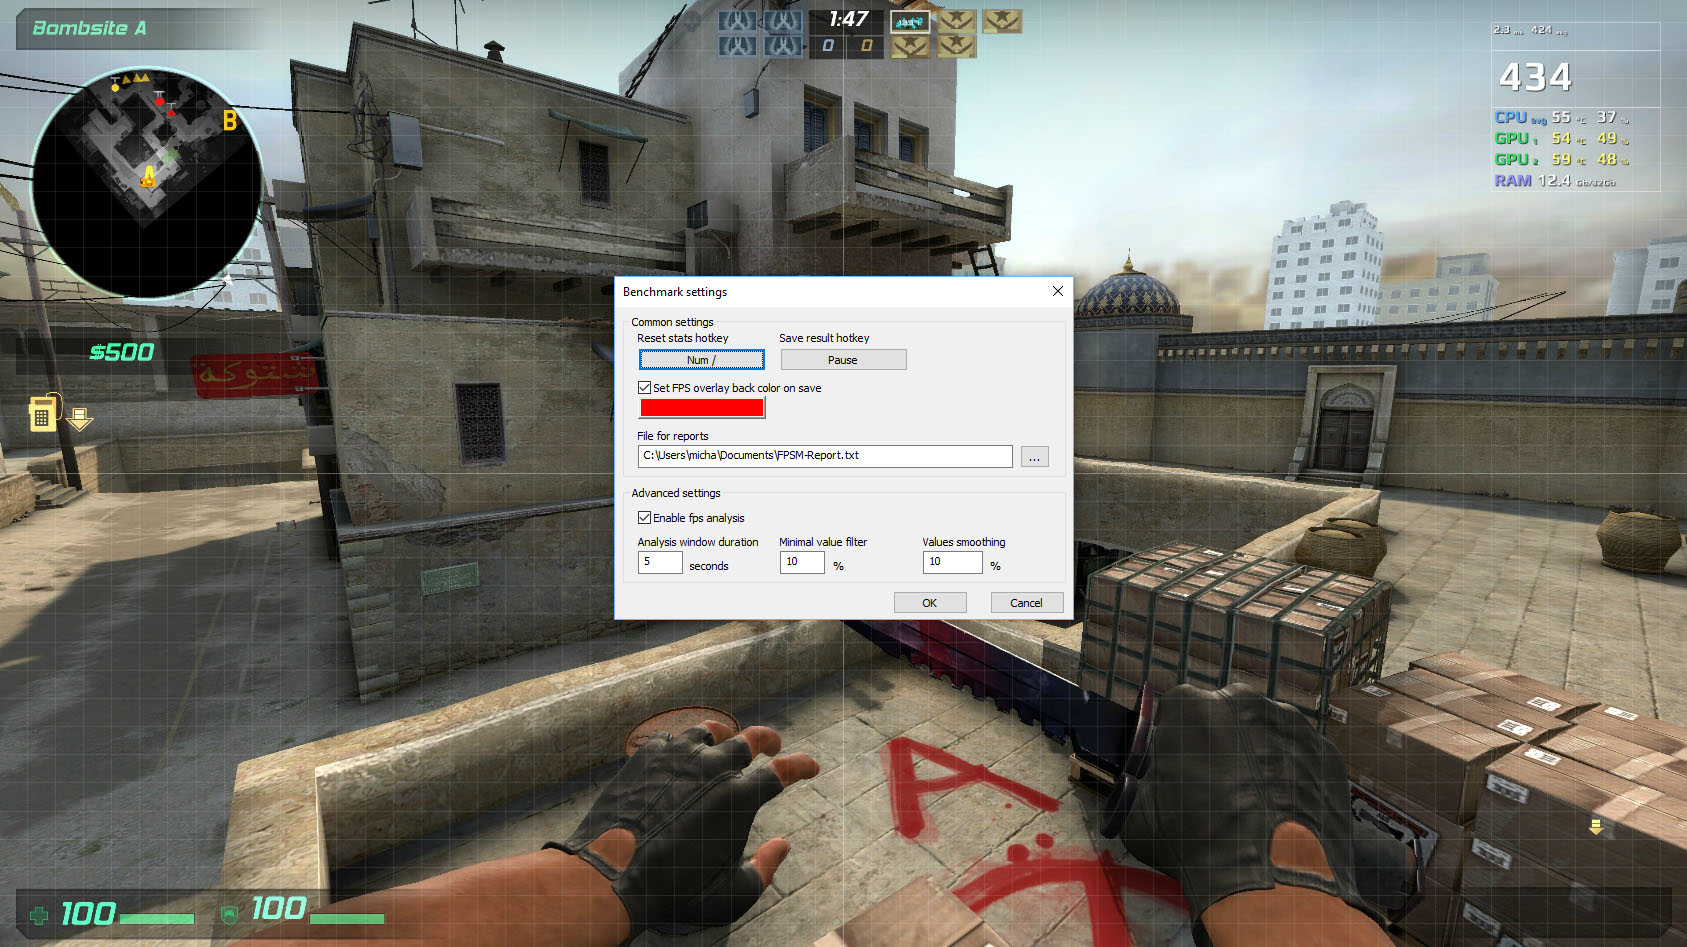 Fps Monitor Ingame Overlay Tool Which Gives Valuable System Information And Reports When Hardware Works Close To Critical State - roblox fps counter app